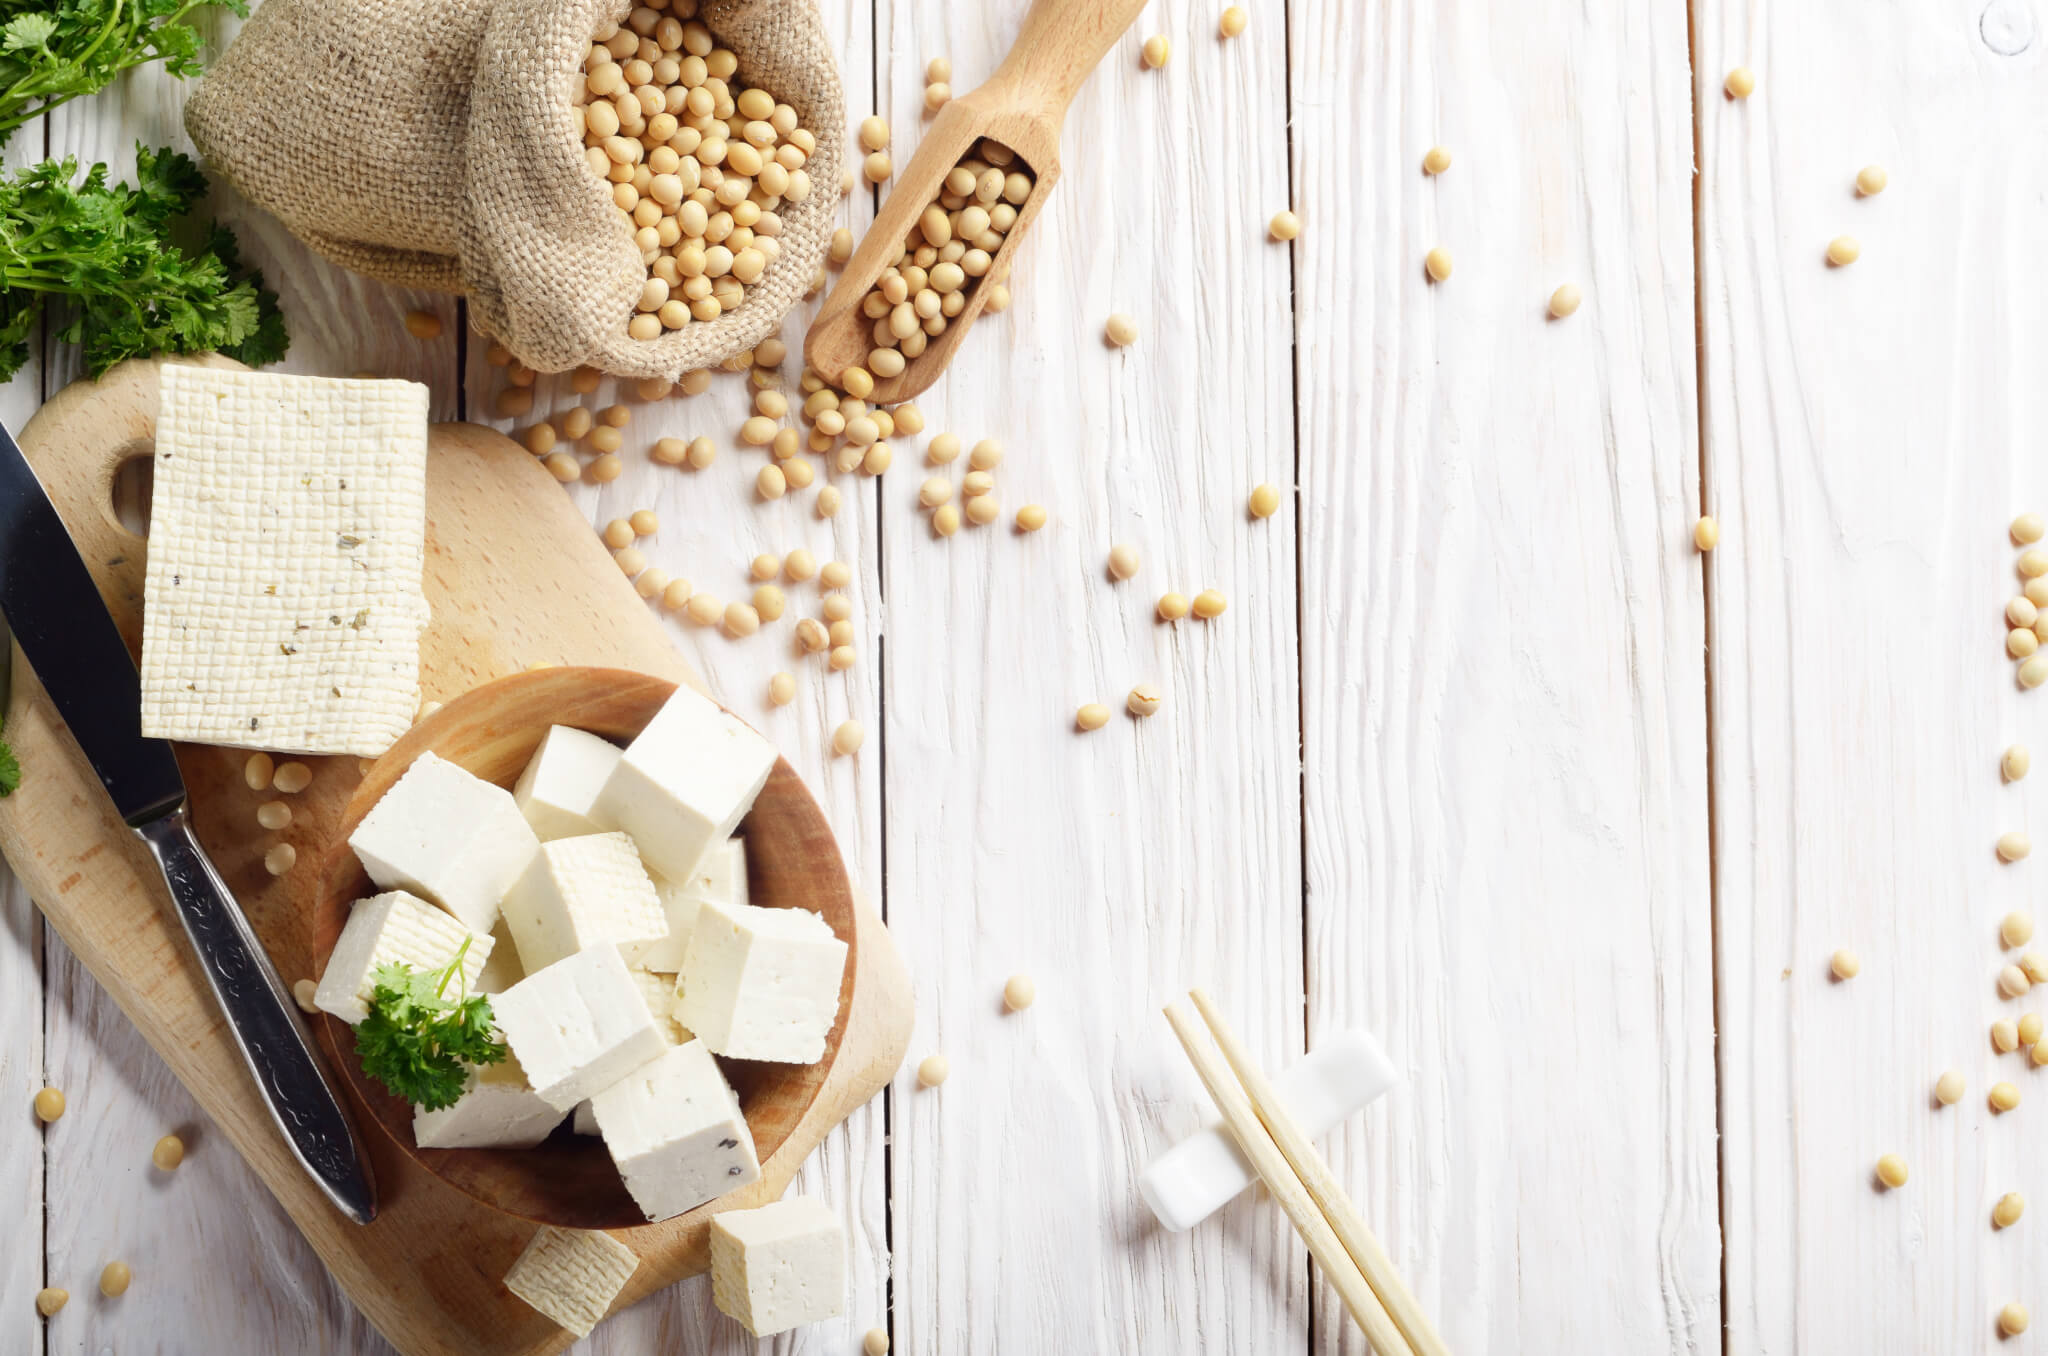 Soy protein sources - tofu, soybeans, non-dairy